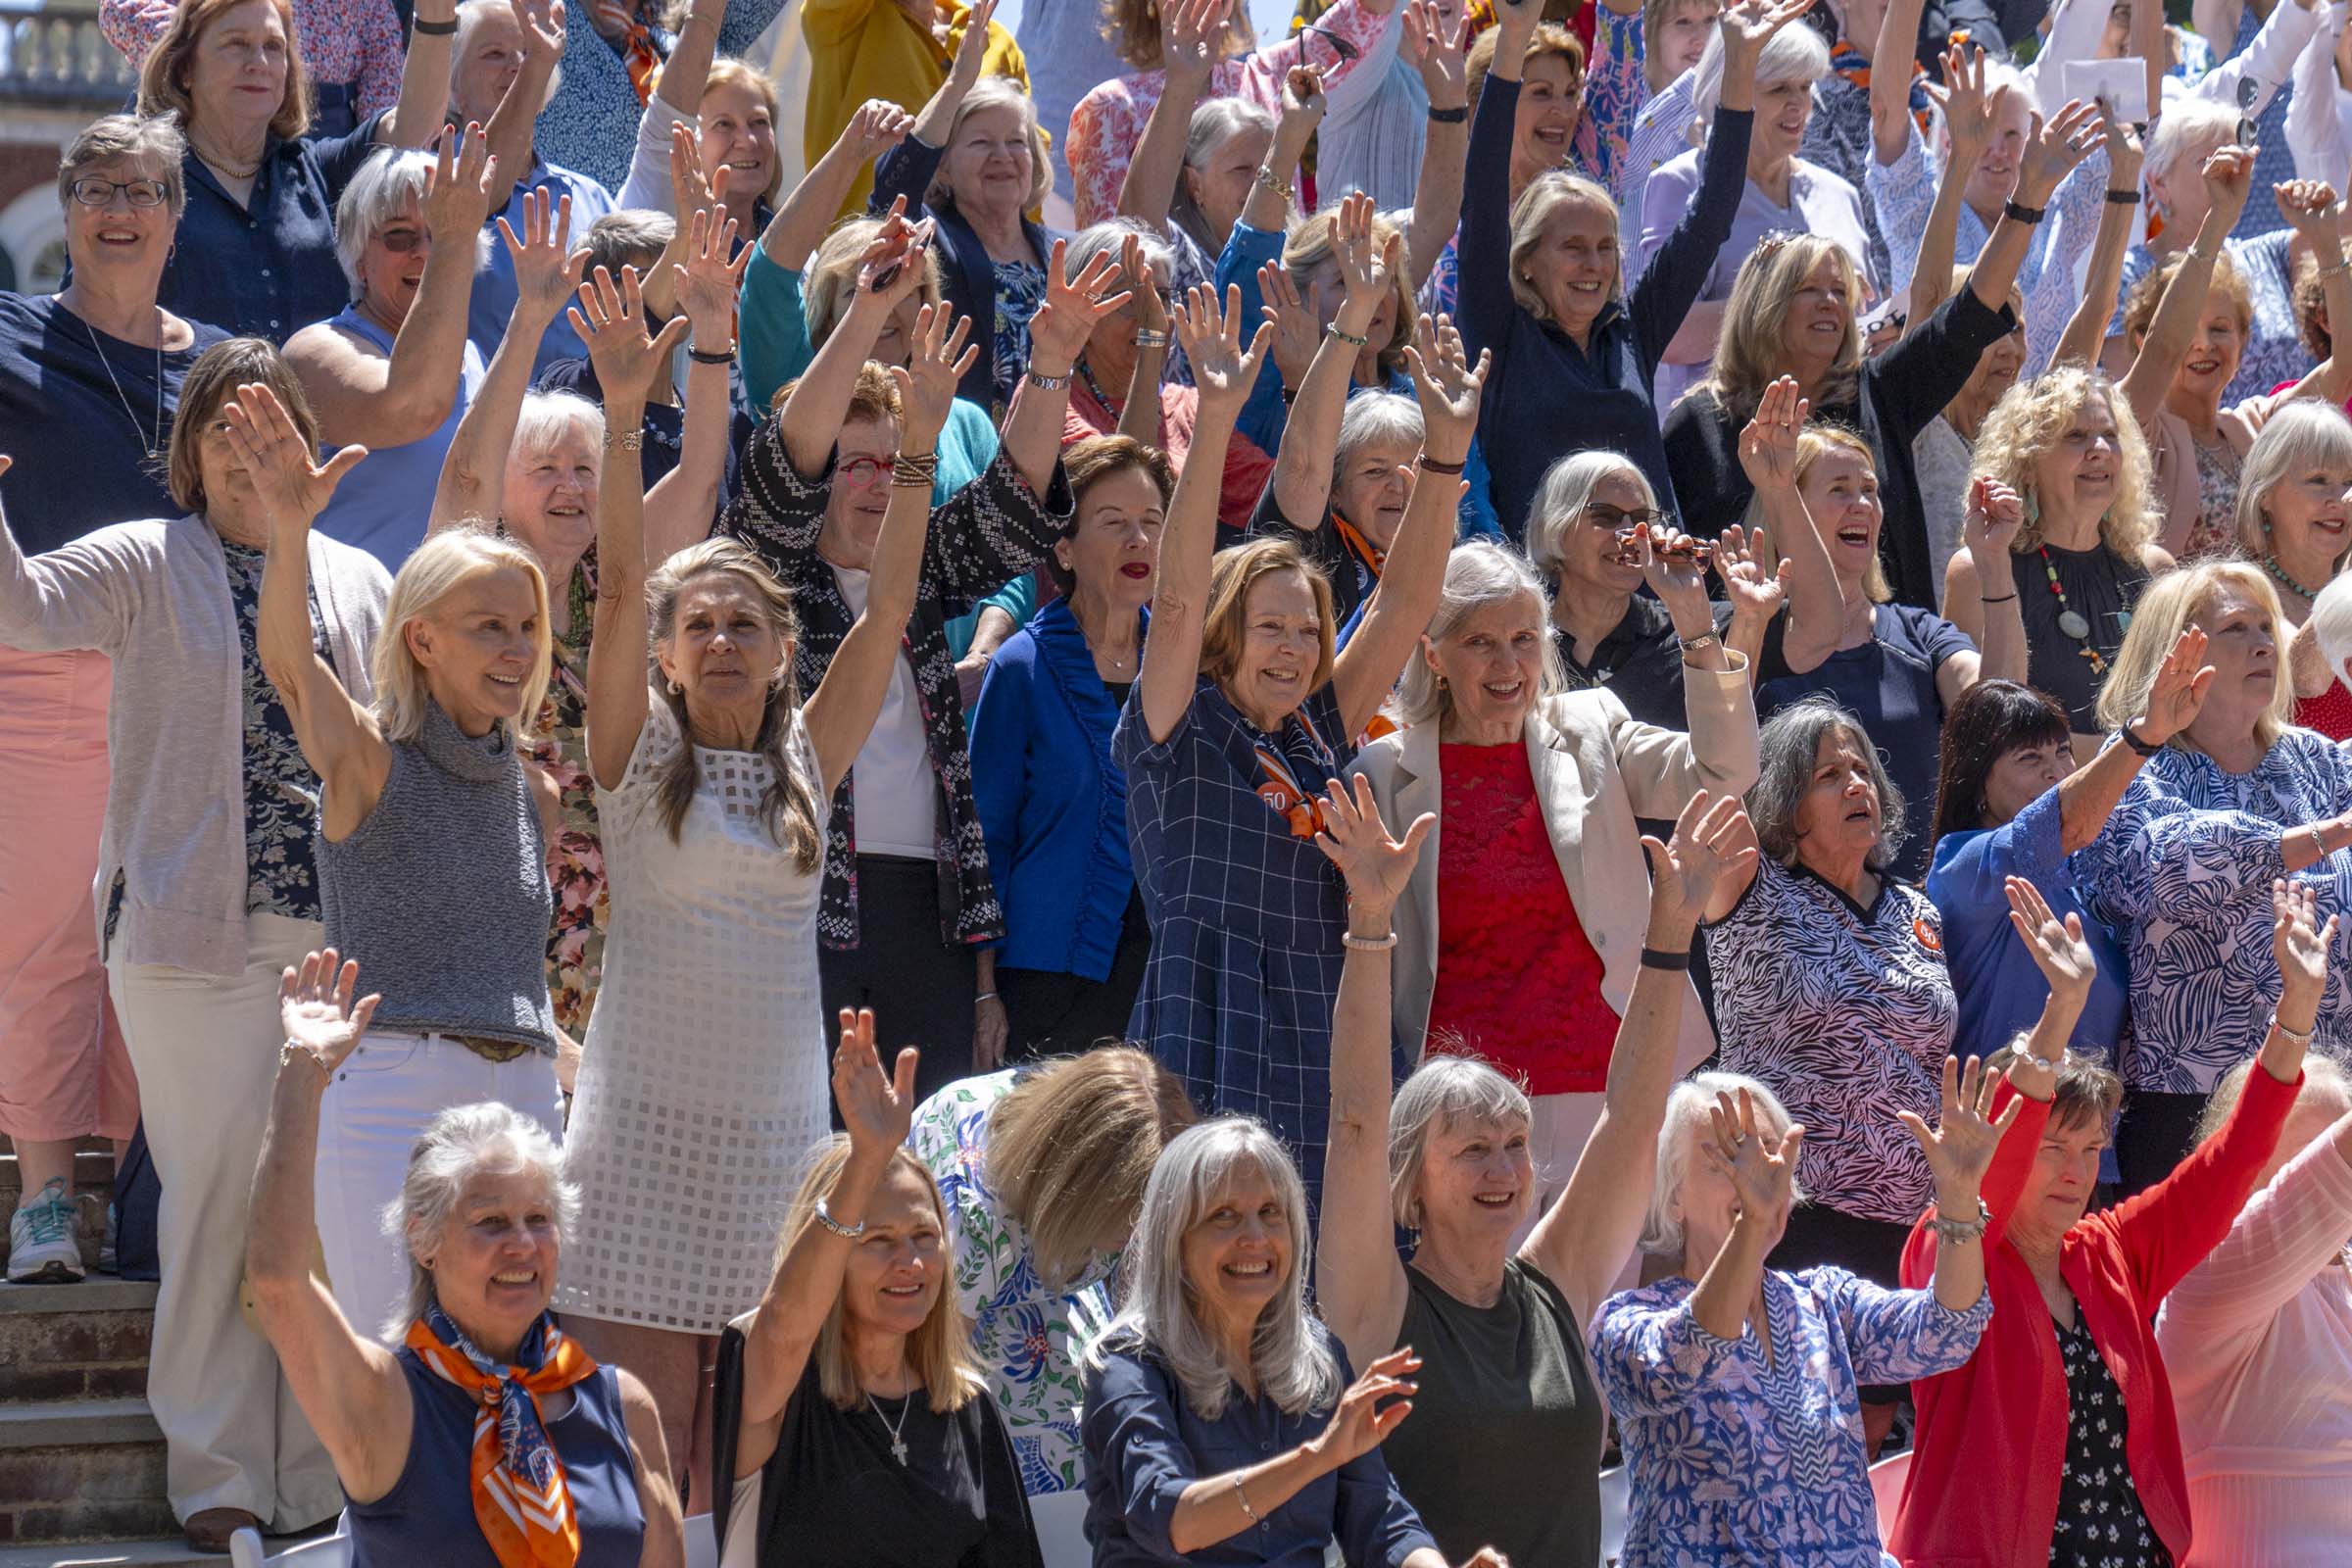 About 140 alumnae of UVA’s class of 1974 gathered on the steps of the Rotunda